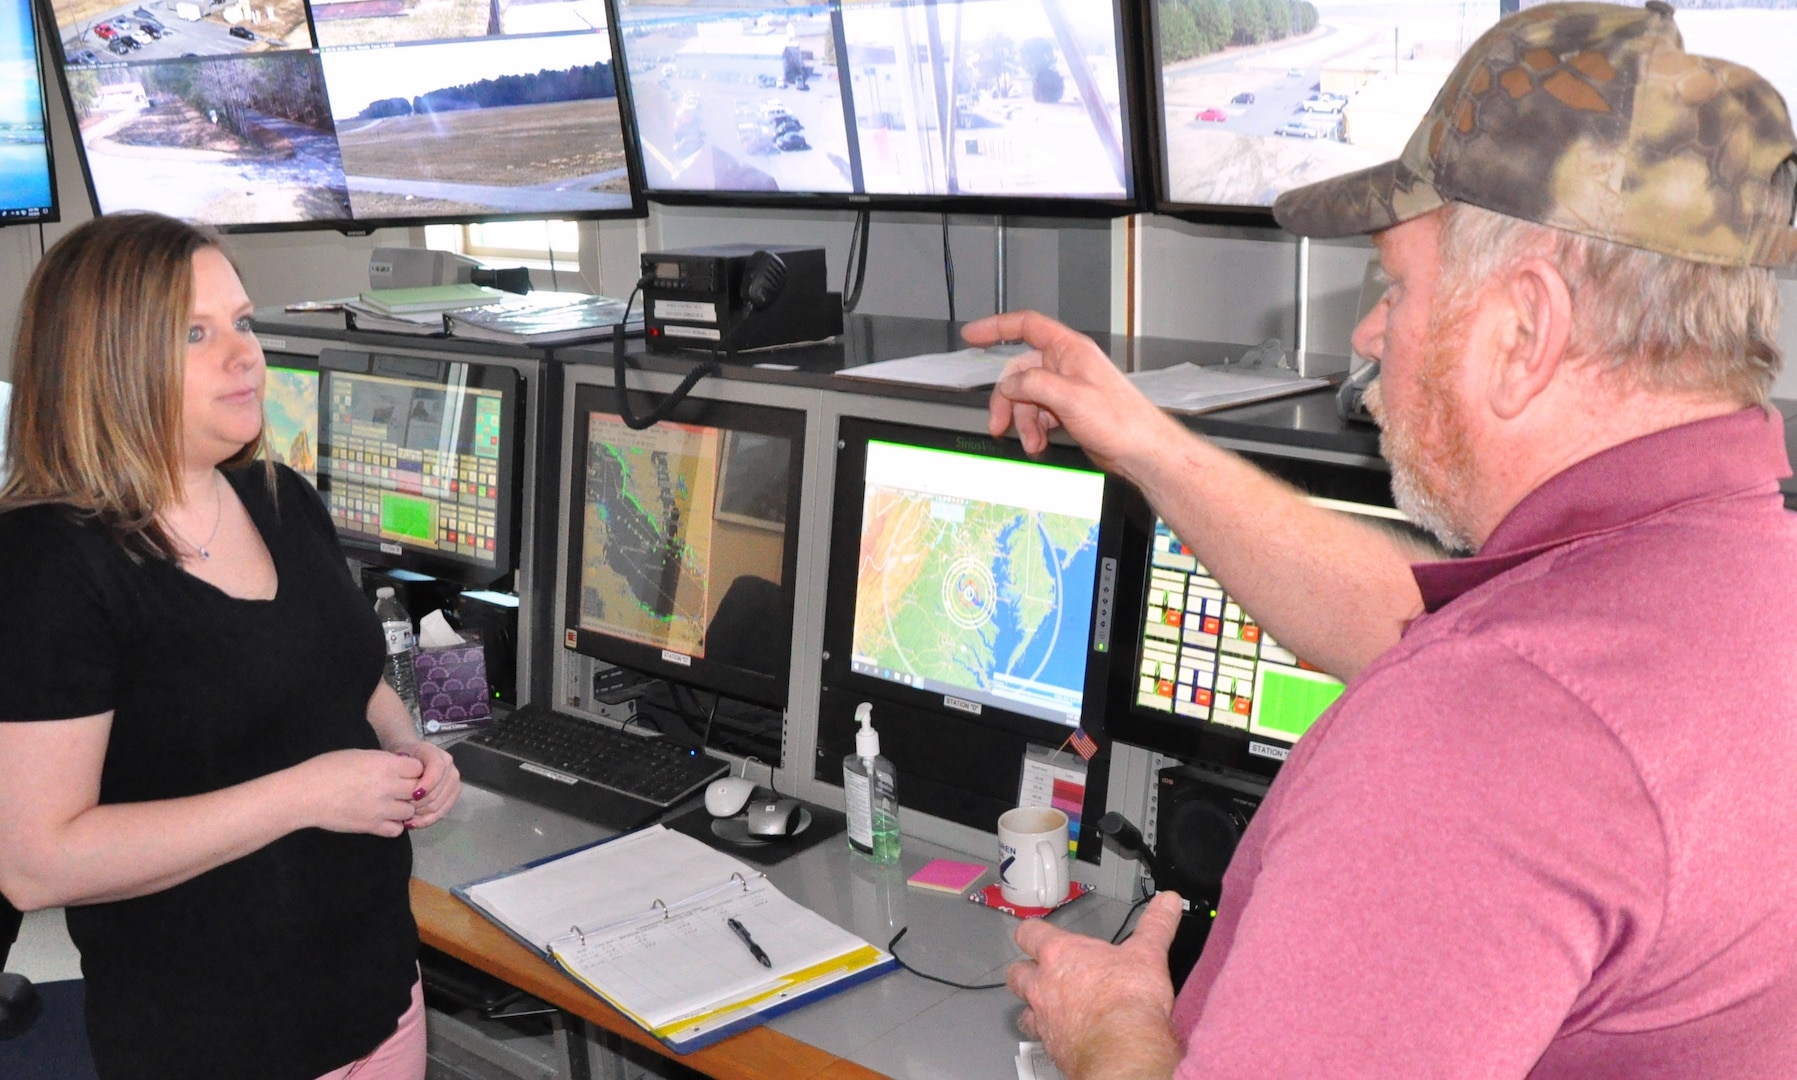 IMAGE: DAHLGREN, Va. (March 4, 2019) - Jennifer Ferrell - administrative lead for the Test and Evaluation Division at Naval Surface Warfare Center Dahlgren Division (NSWCDD) - listens intently as Donnie Preston, NSWCDD Potomac River Test Range (PRTR) Operations Center senior technician, briefs her on range operations. Ferrell is responsible for financial and human resources actions and financial management of the division, including PRTR. "The faster we can get funds properly in place, the faster we can execute the technical work to get the products delivered to the warfighter," said Ferrell. "I find pride in knowing that even though my role is non-technical, I can still make an impact to our warfighters by promoting more efficient financial and human resources policies and processes."